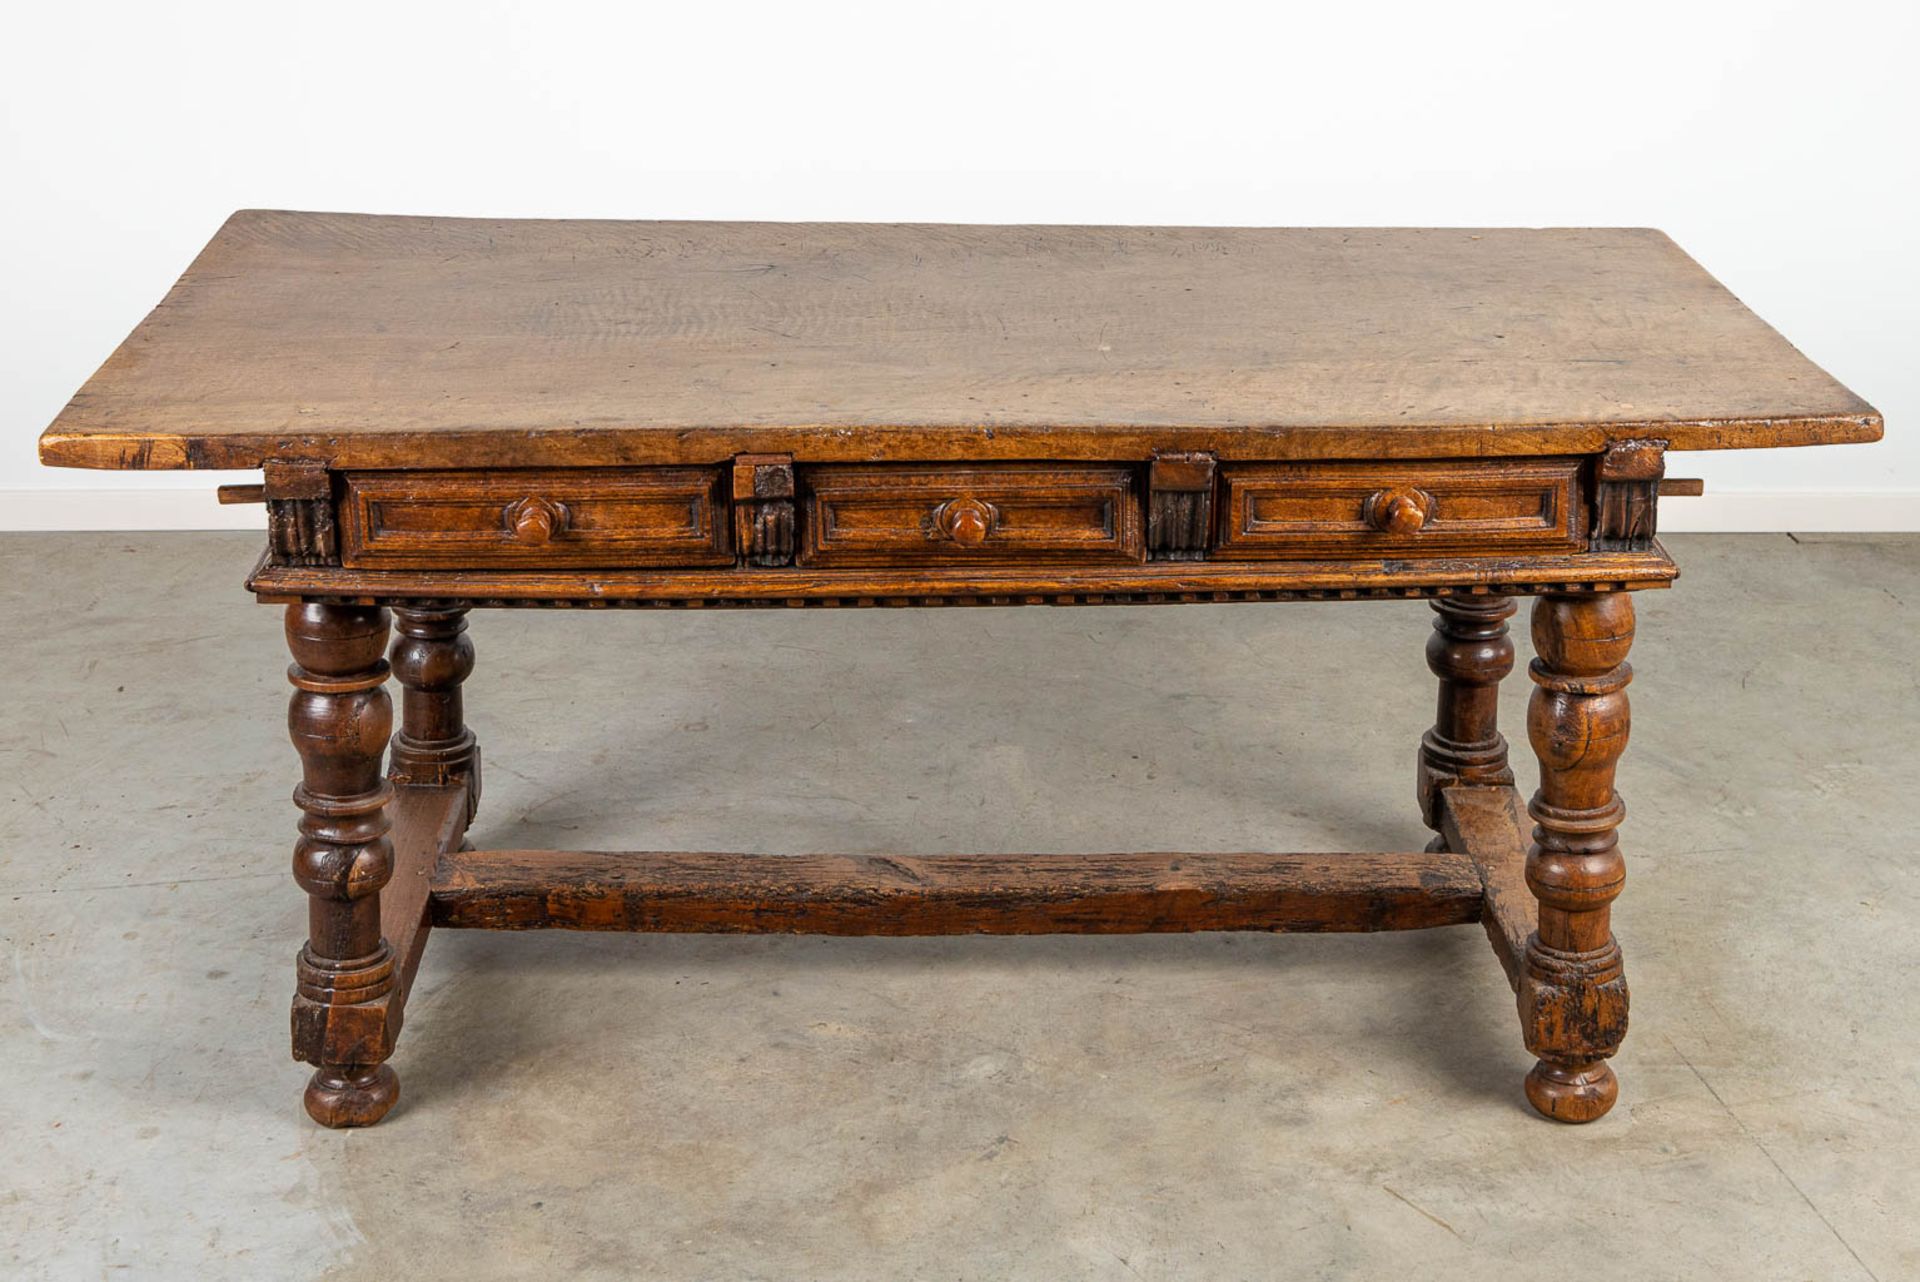 An antique table with 6 drawers, made during the 17th century. - Image 11 of 12